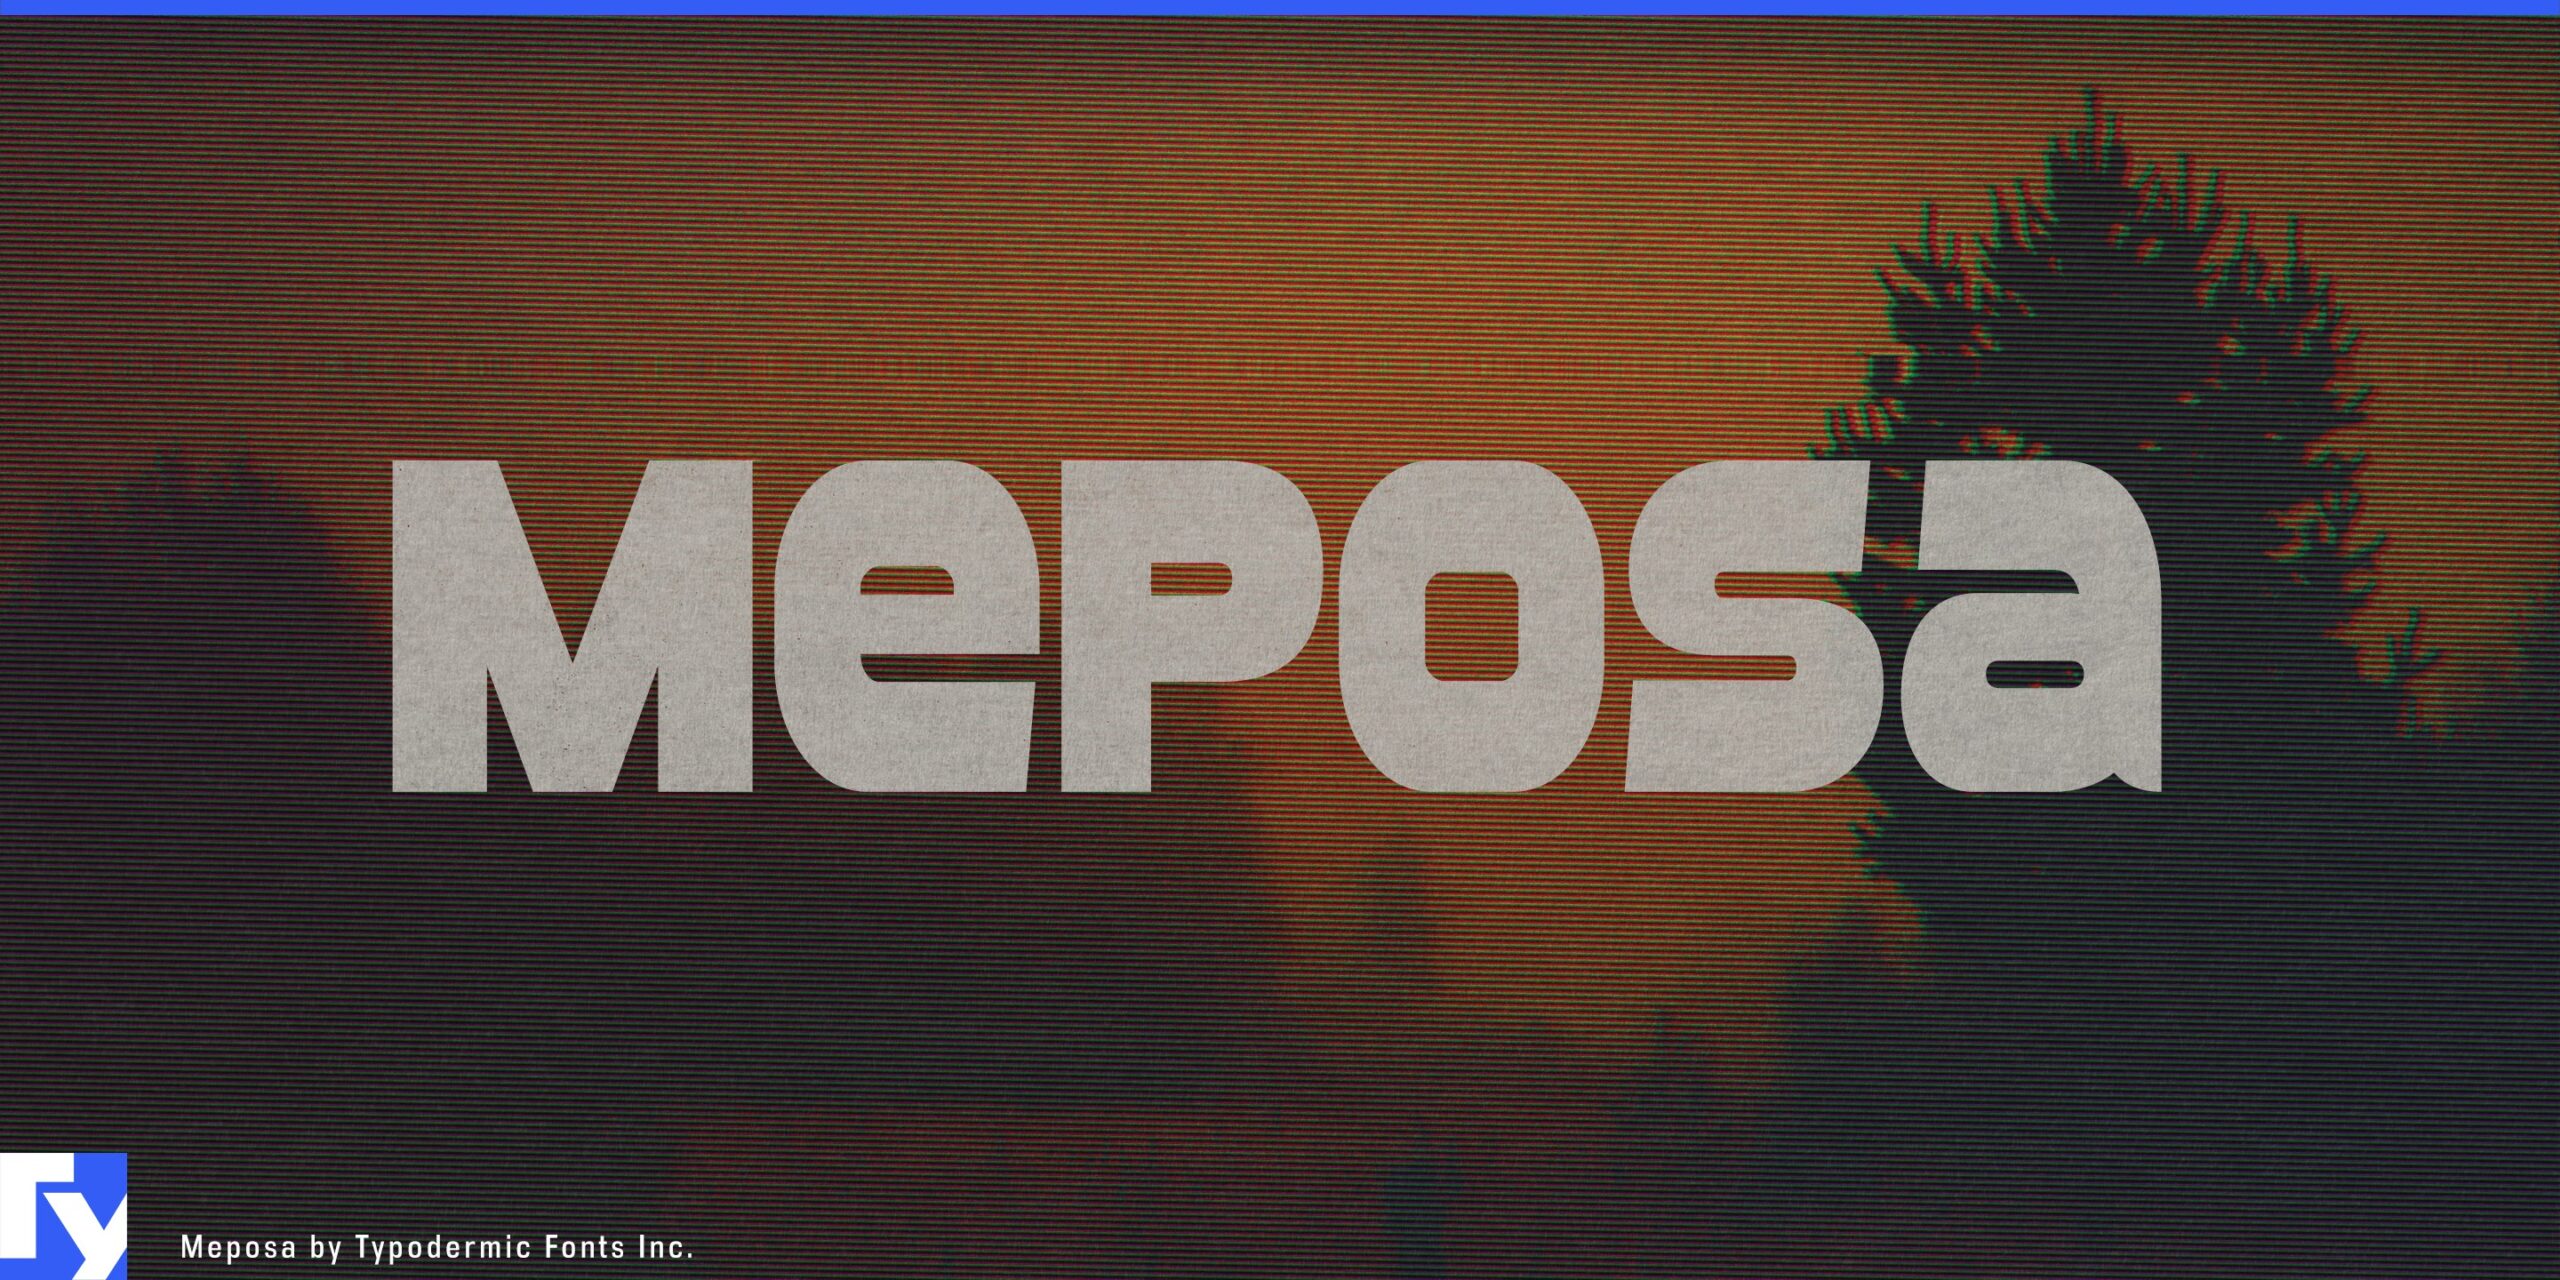 Meposa Typeface: Quirky, Tough, and Unforgettable